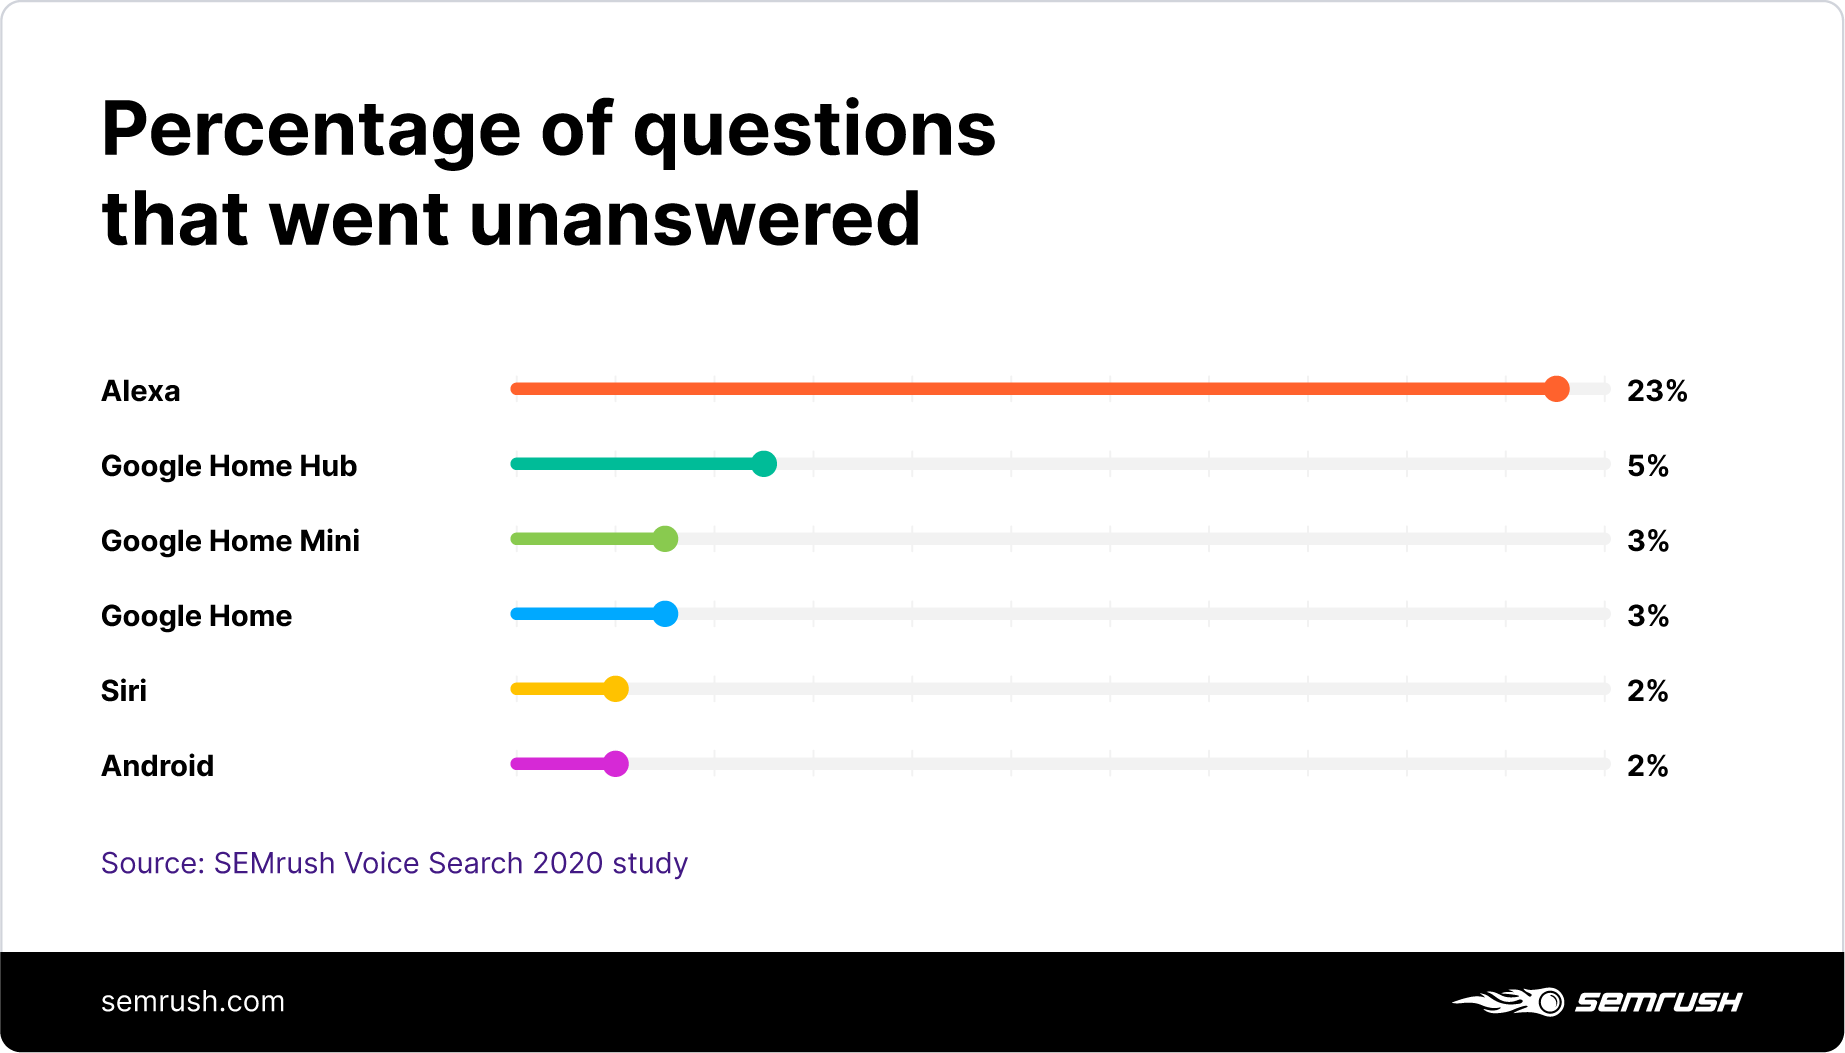 Percentage of questions unanswered by voice assistants